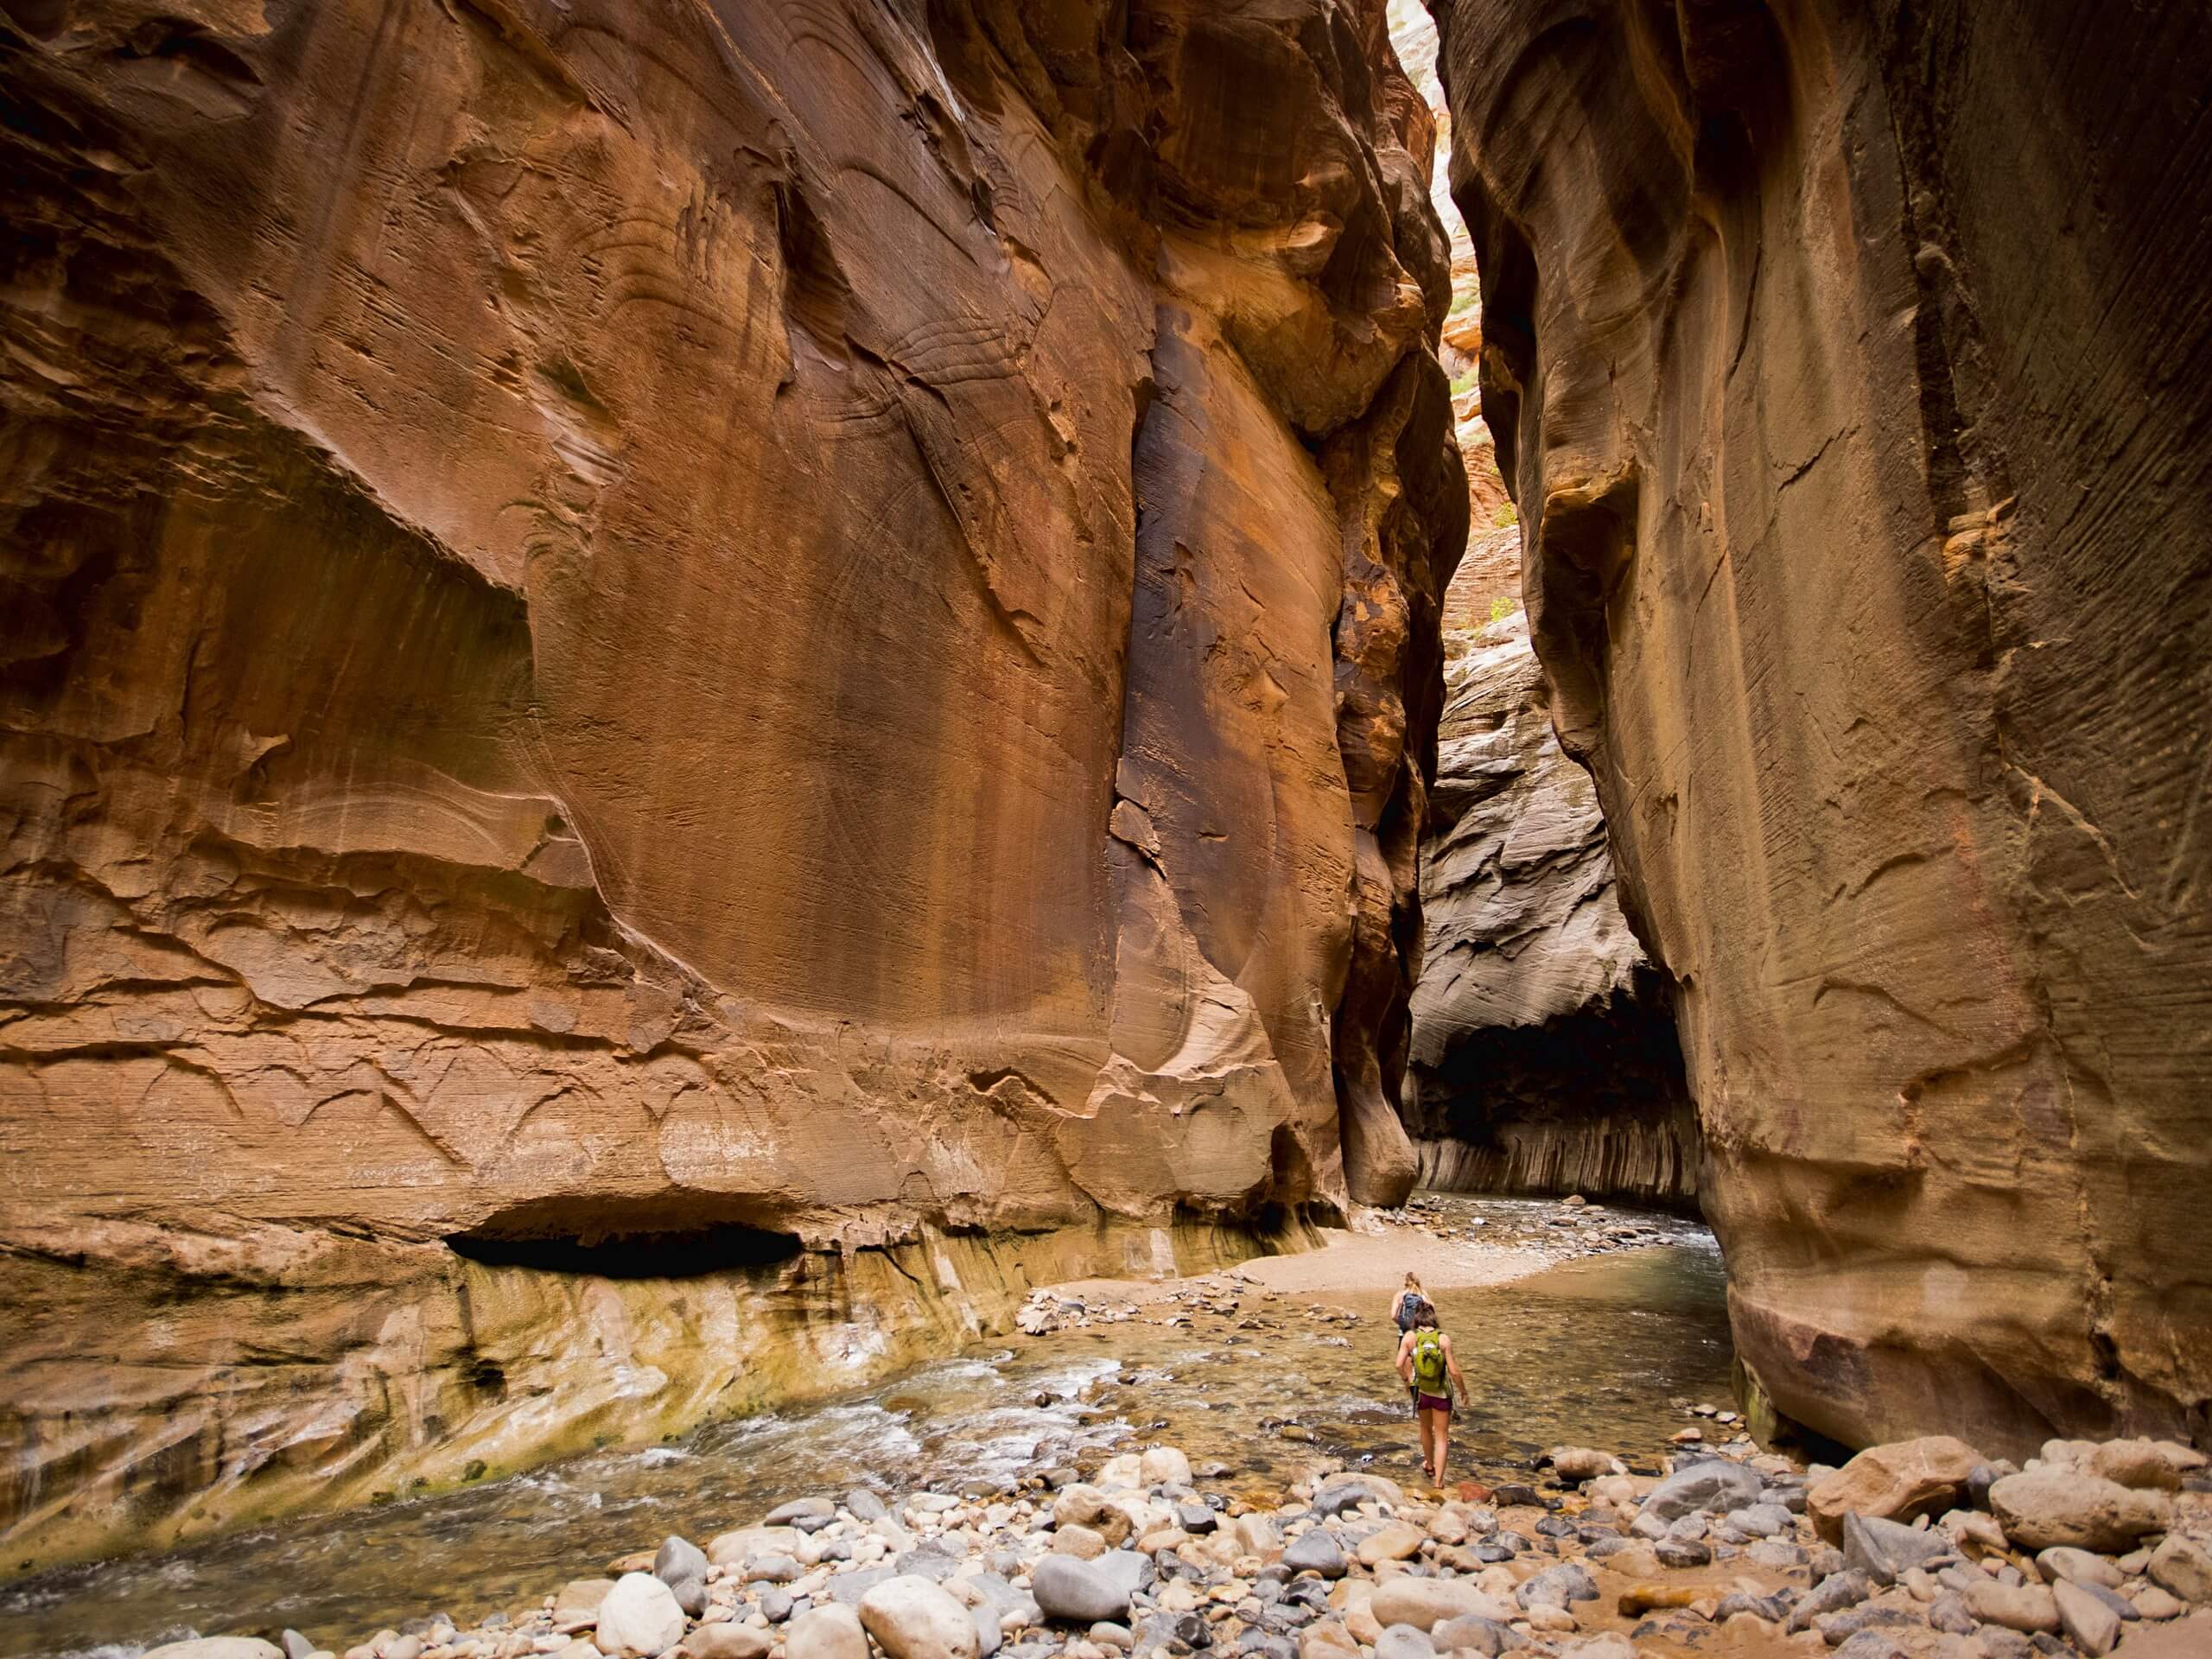 Zion Narrows: Bottom up to Big Springs